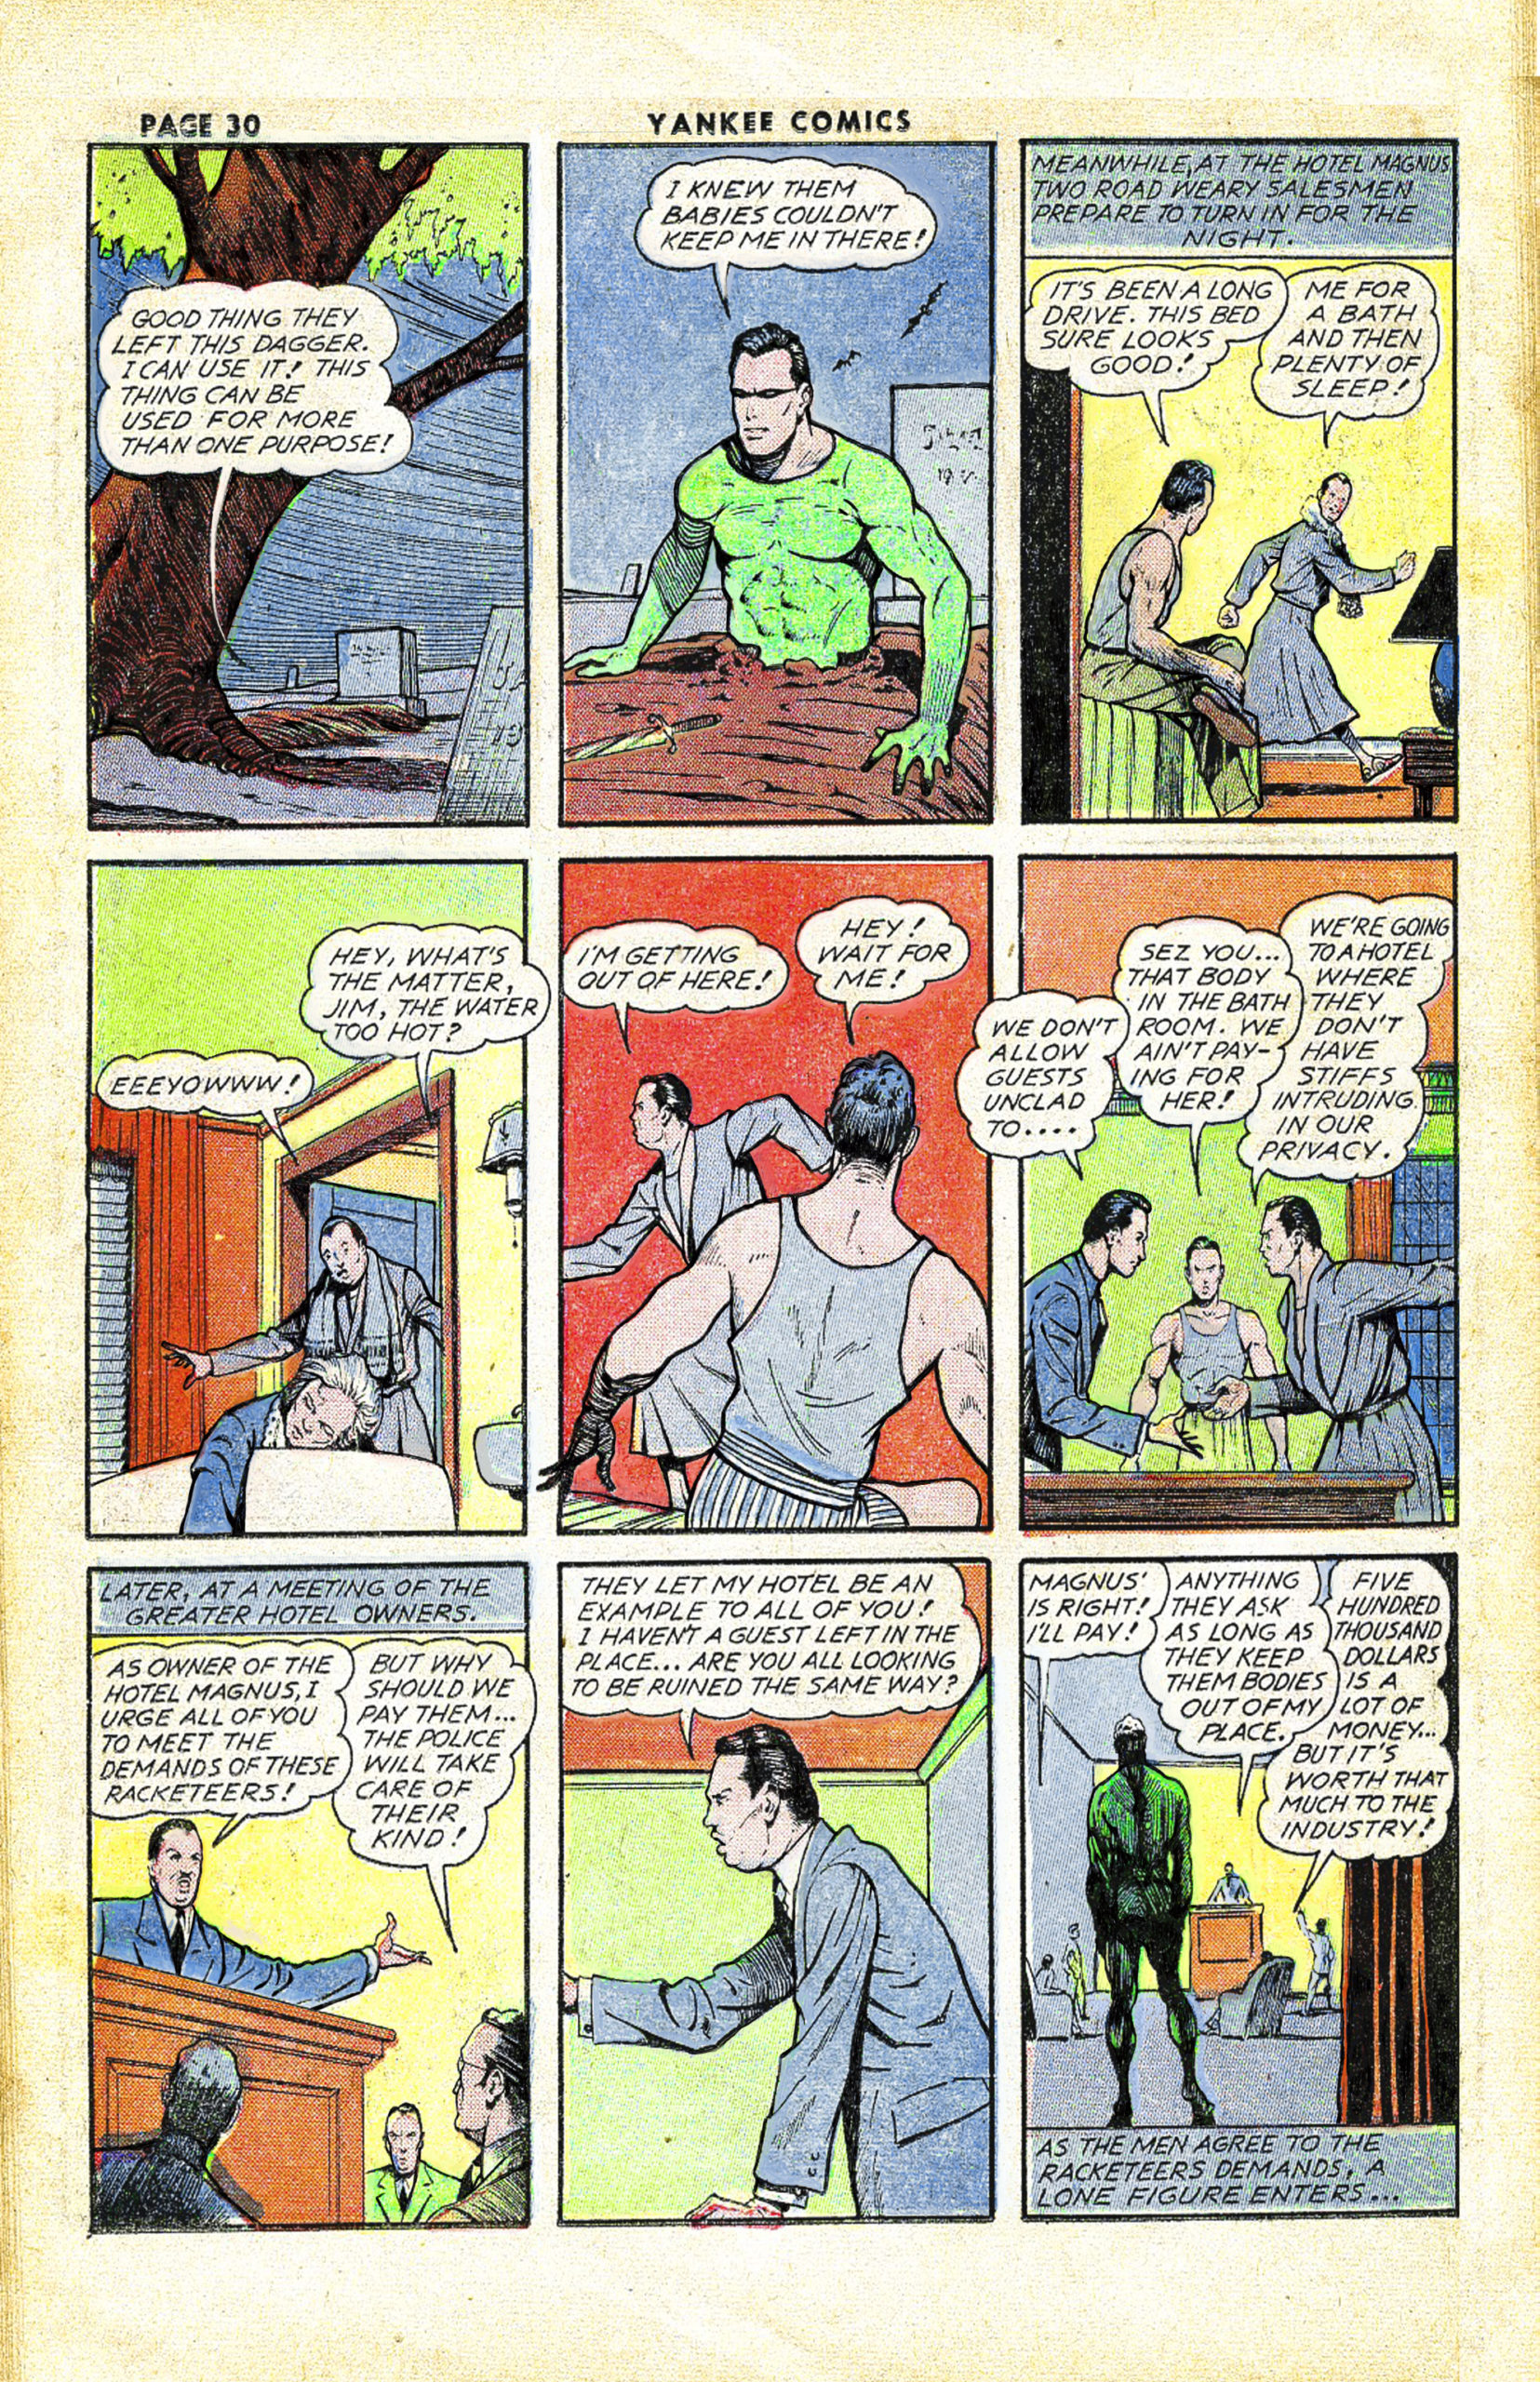 The Enchanted Dagger #5 – Page 21 (classic Enchanted Dagger)